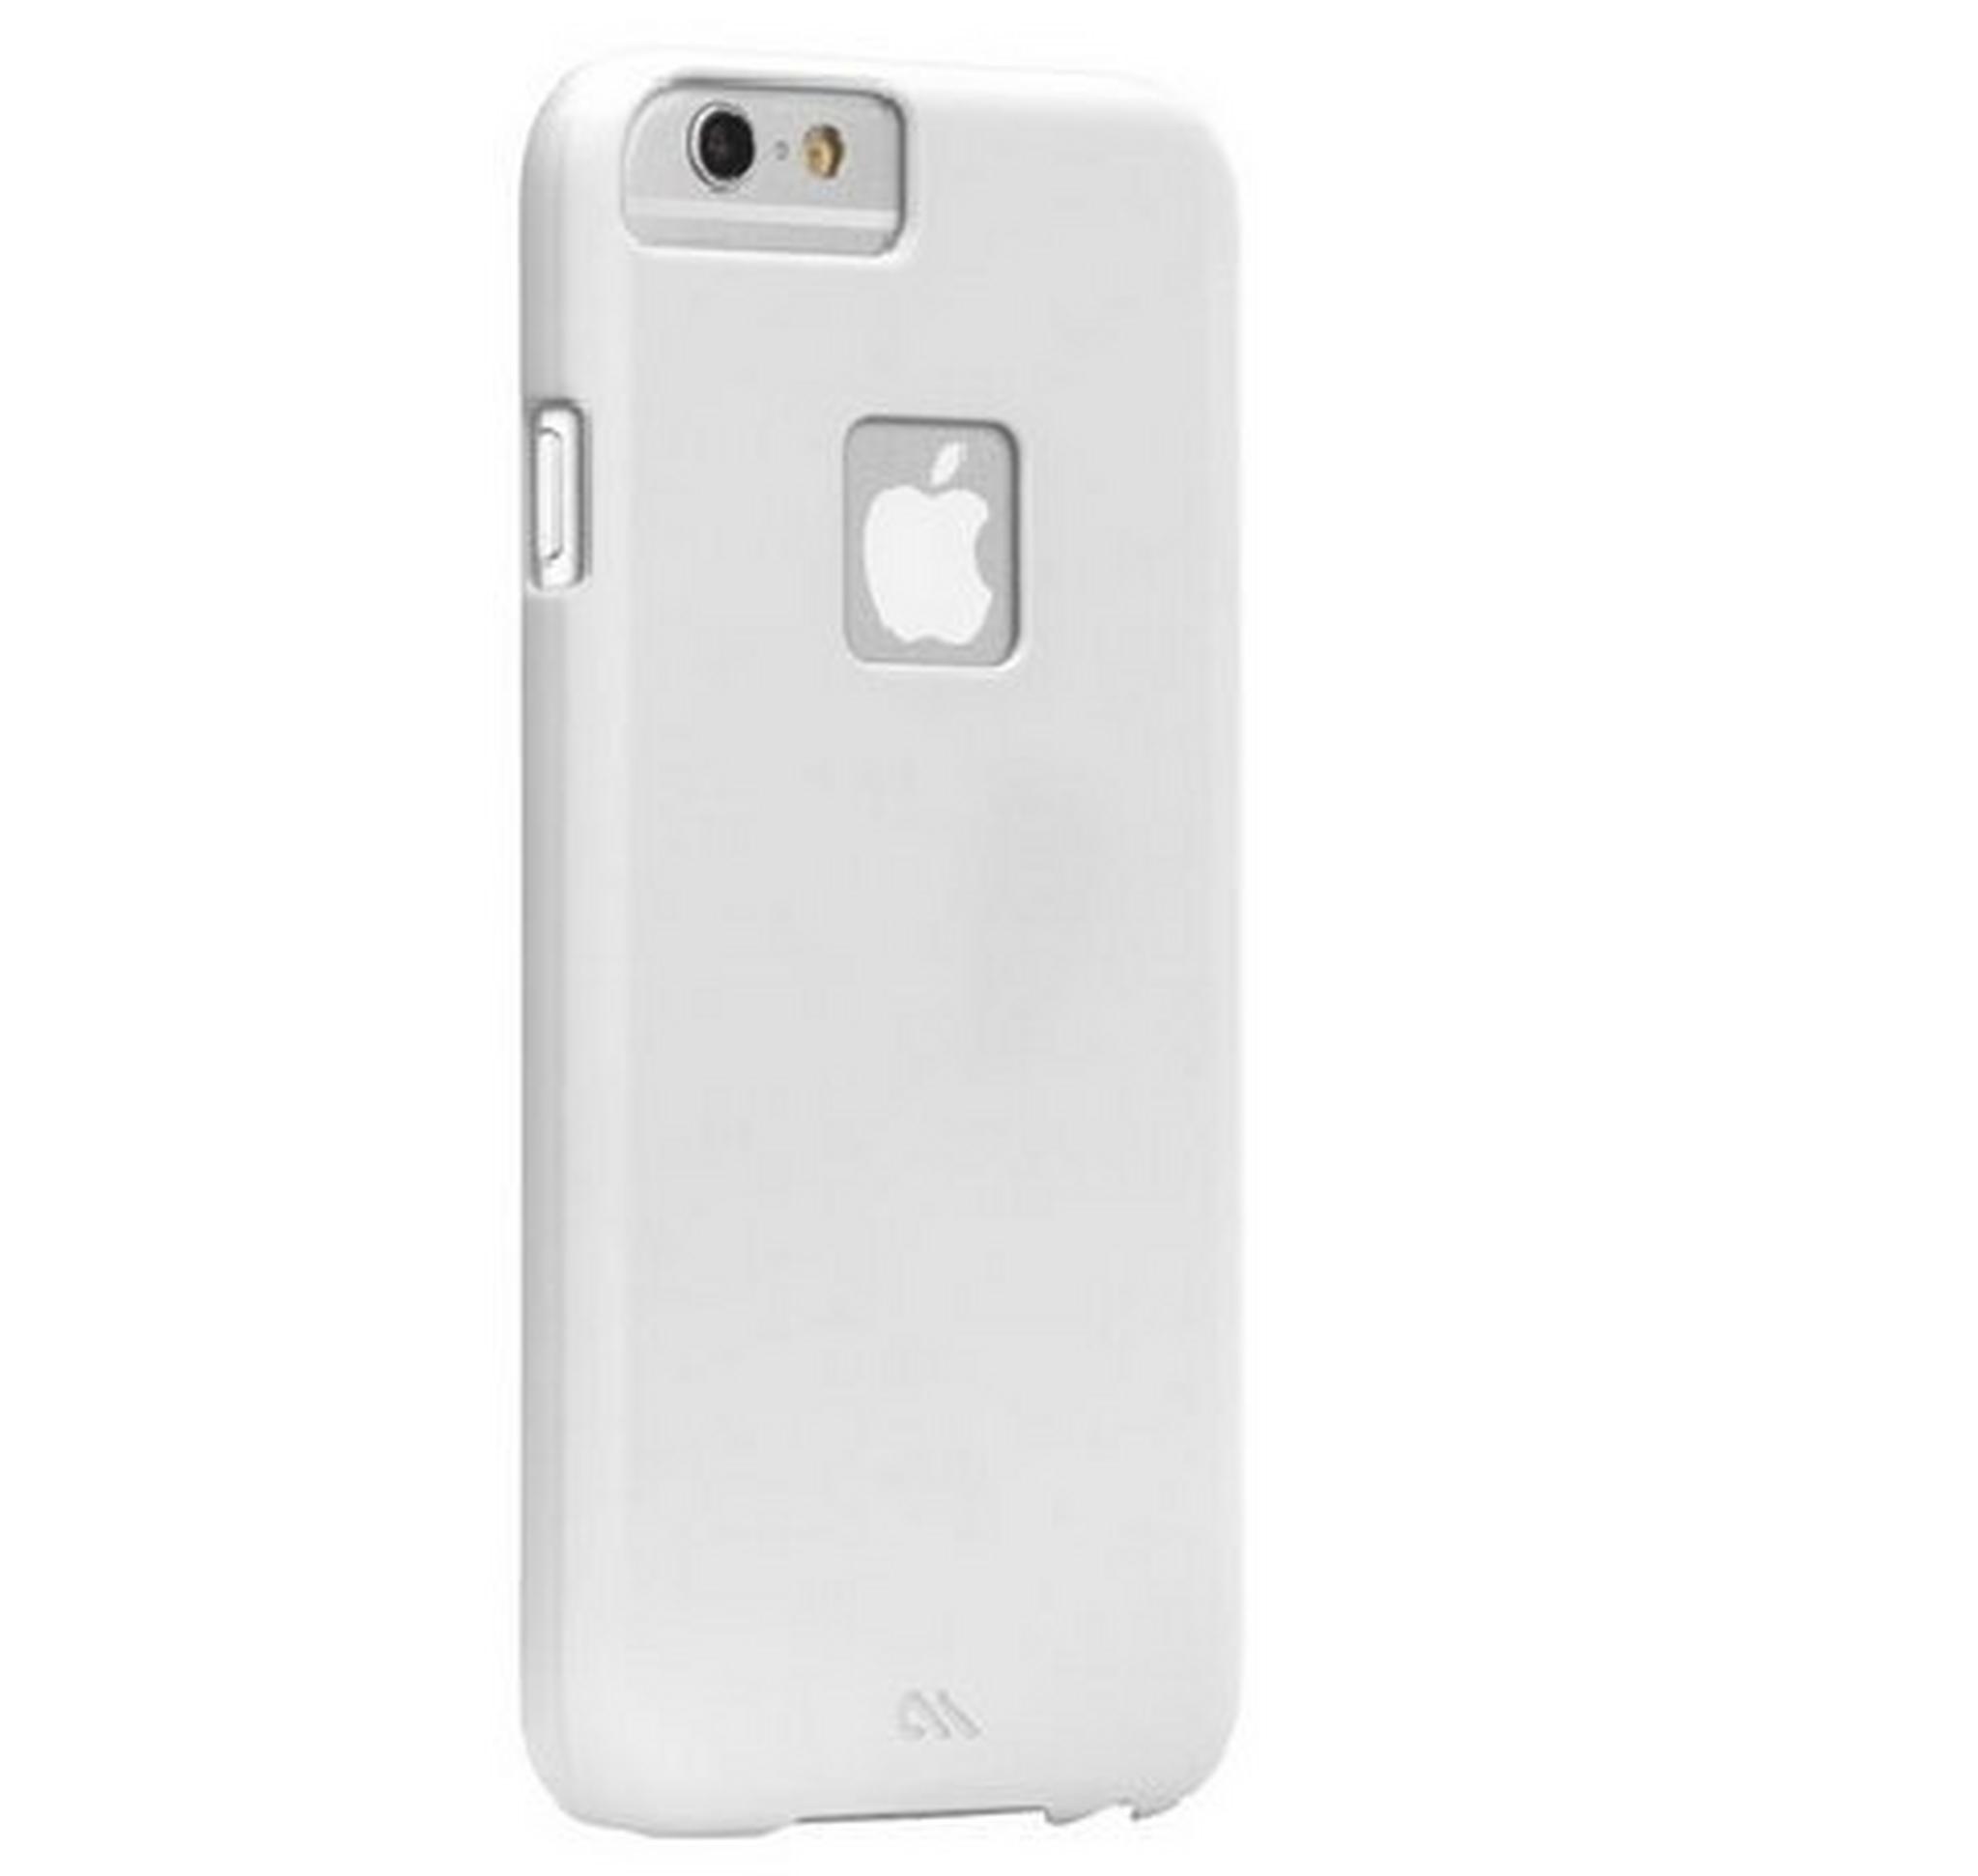 Case Mate Barely There Case for iPhone 6 - White